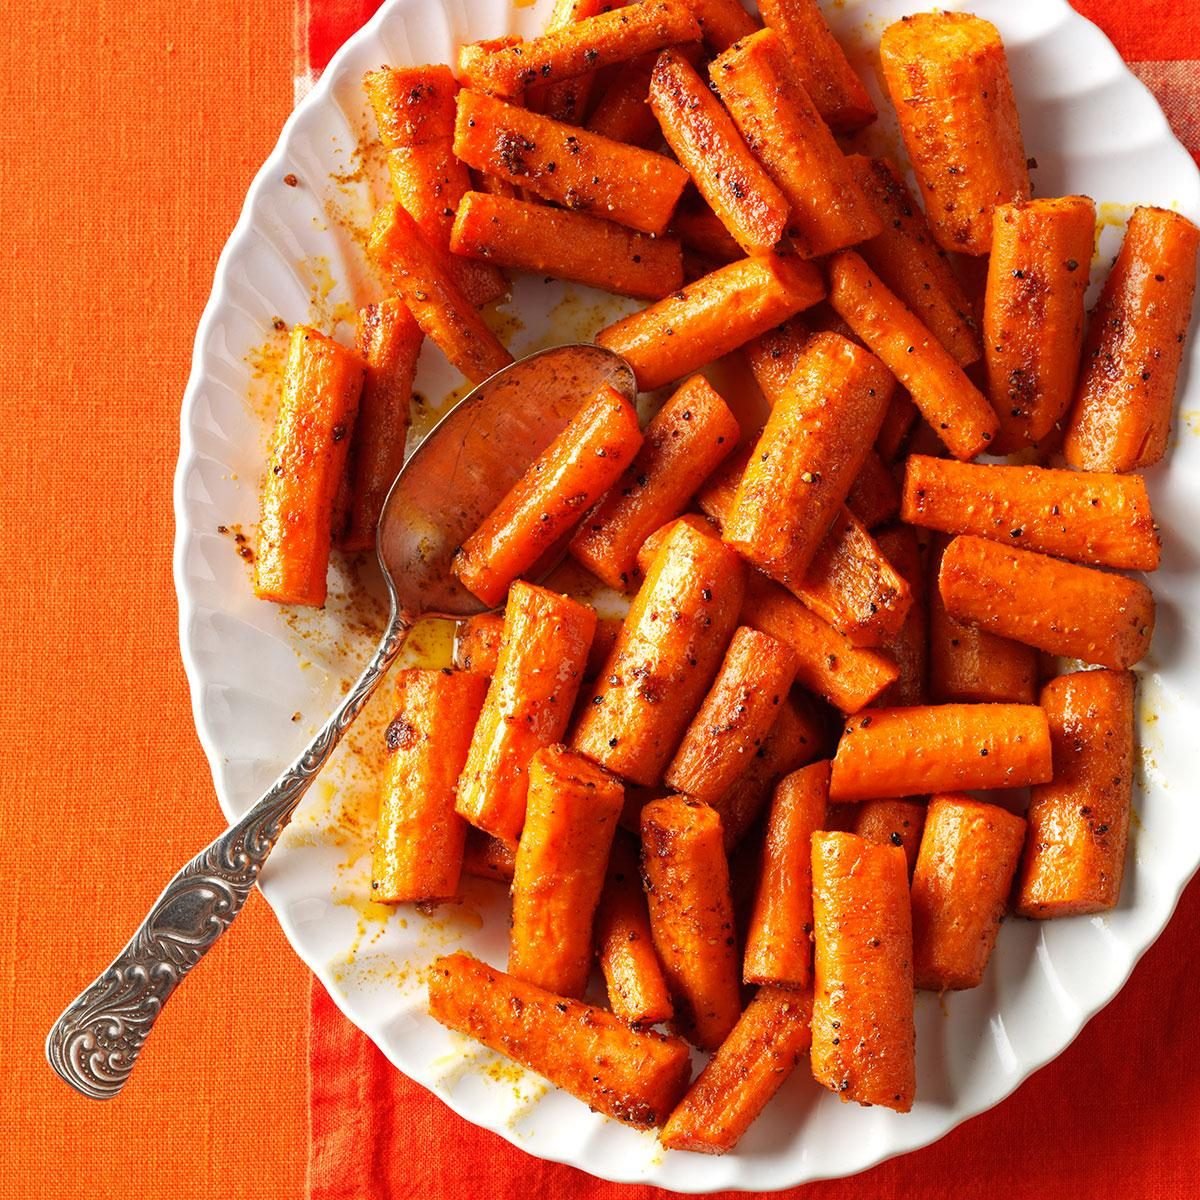 Missouri: Oven-Roasted Spiced Carrots